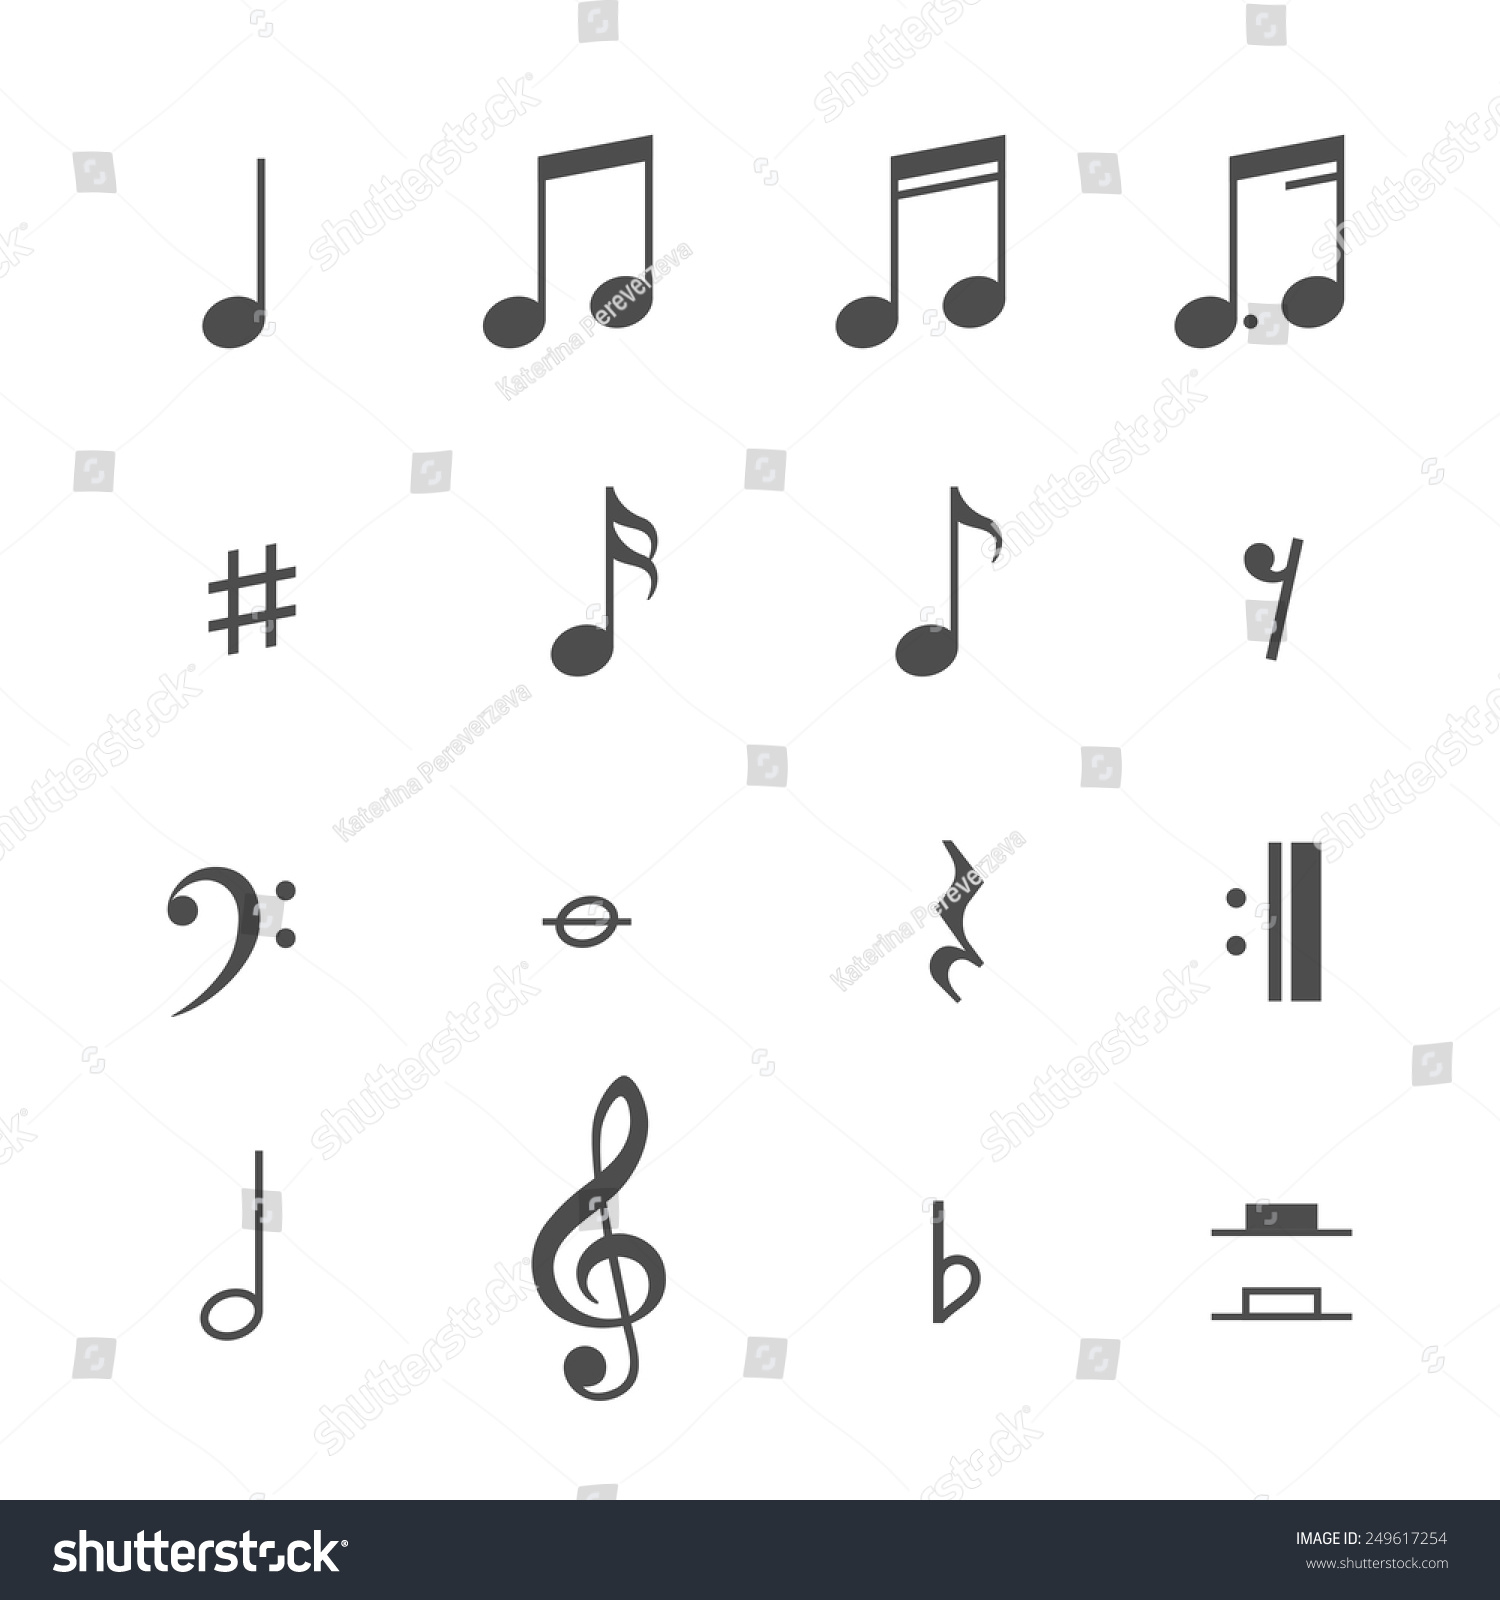 Music Notes And Icons Set. Vector Illustration - 249617254 : Shutterstock